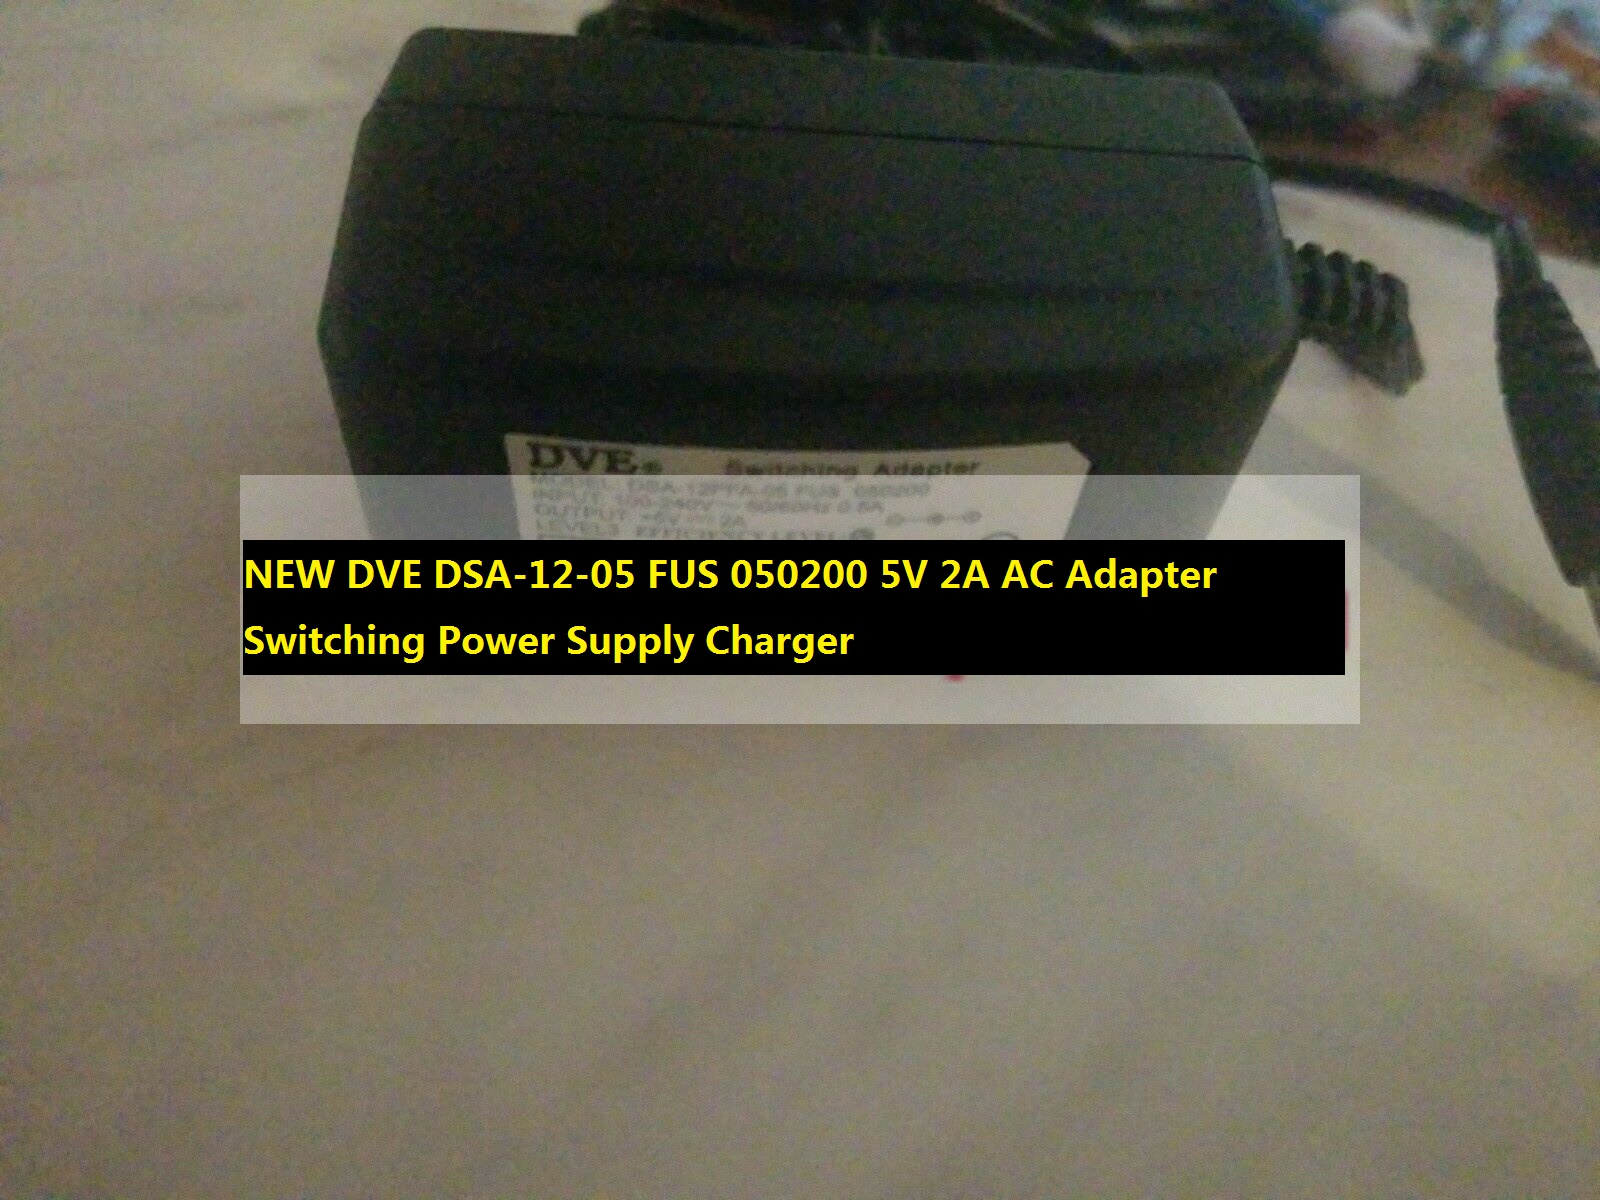 *Brand NEW*5V 2A AC Adapter DVE DSA-12-05 FUS 050200 Switching Power Supply Charger - Click Image to Close